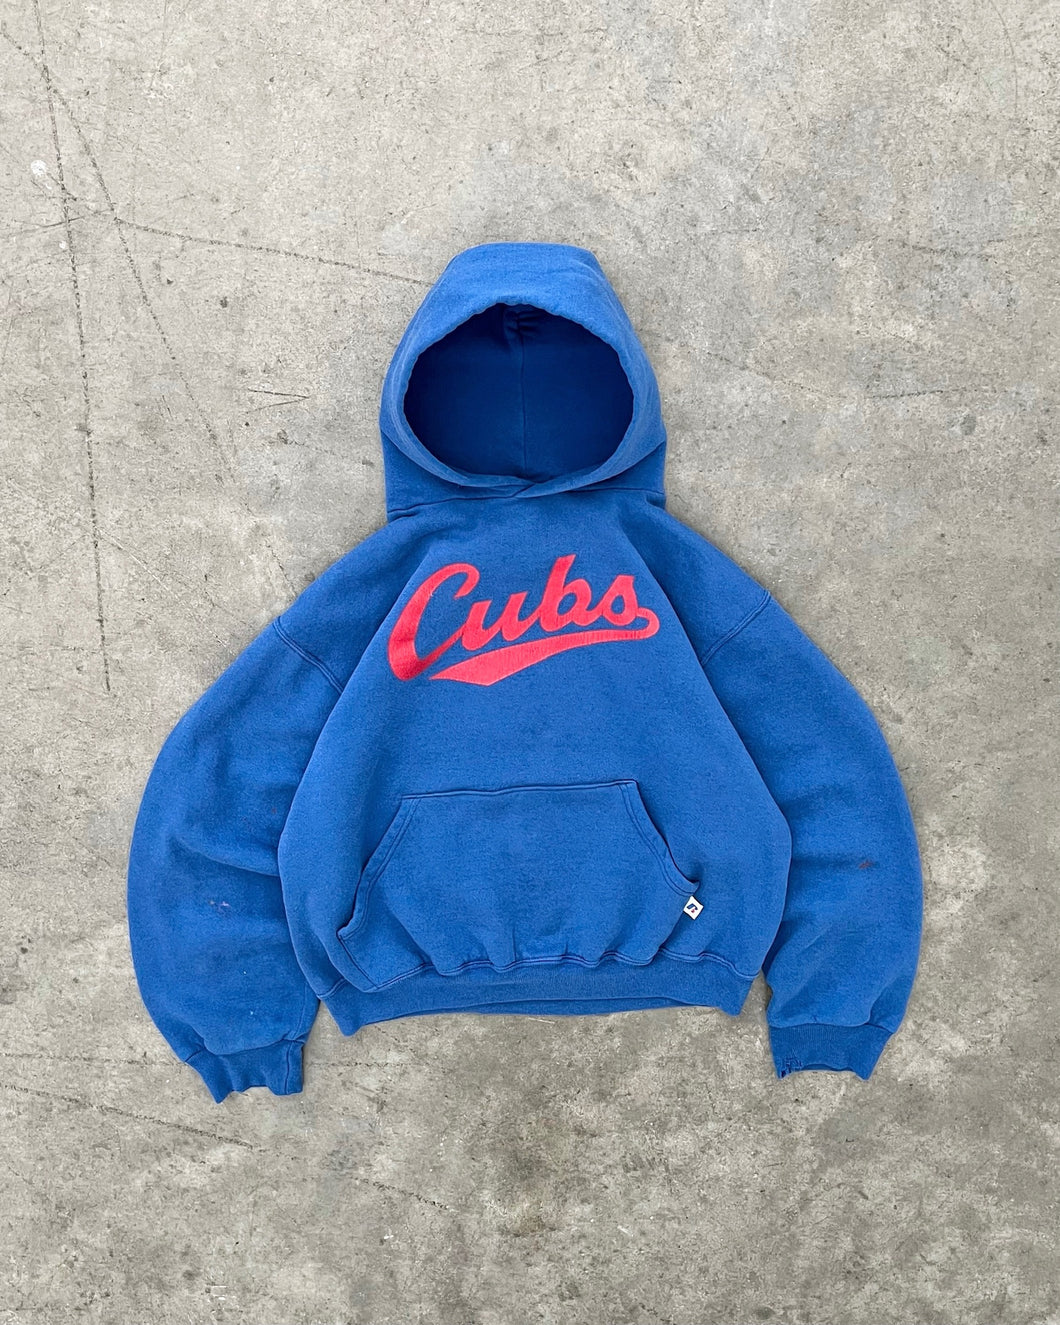 FADED BLUE “CUBS” RUSSELL HOODIE - 1990S